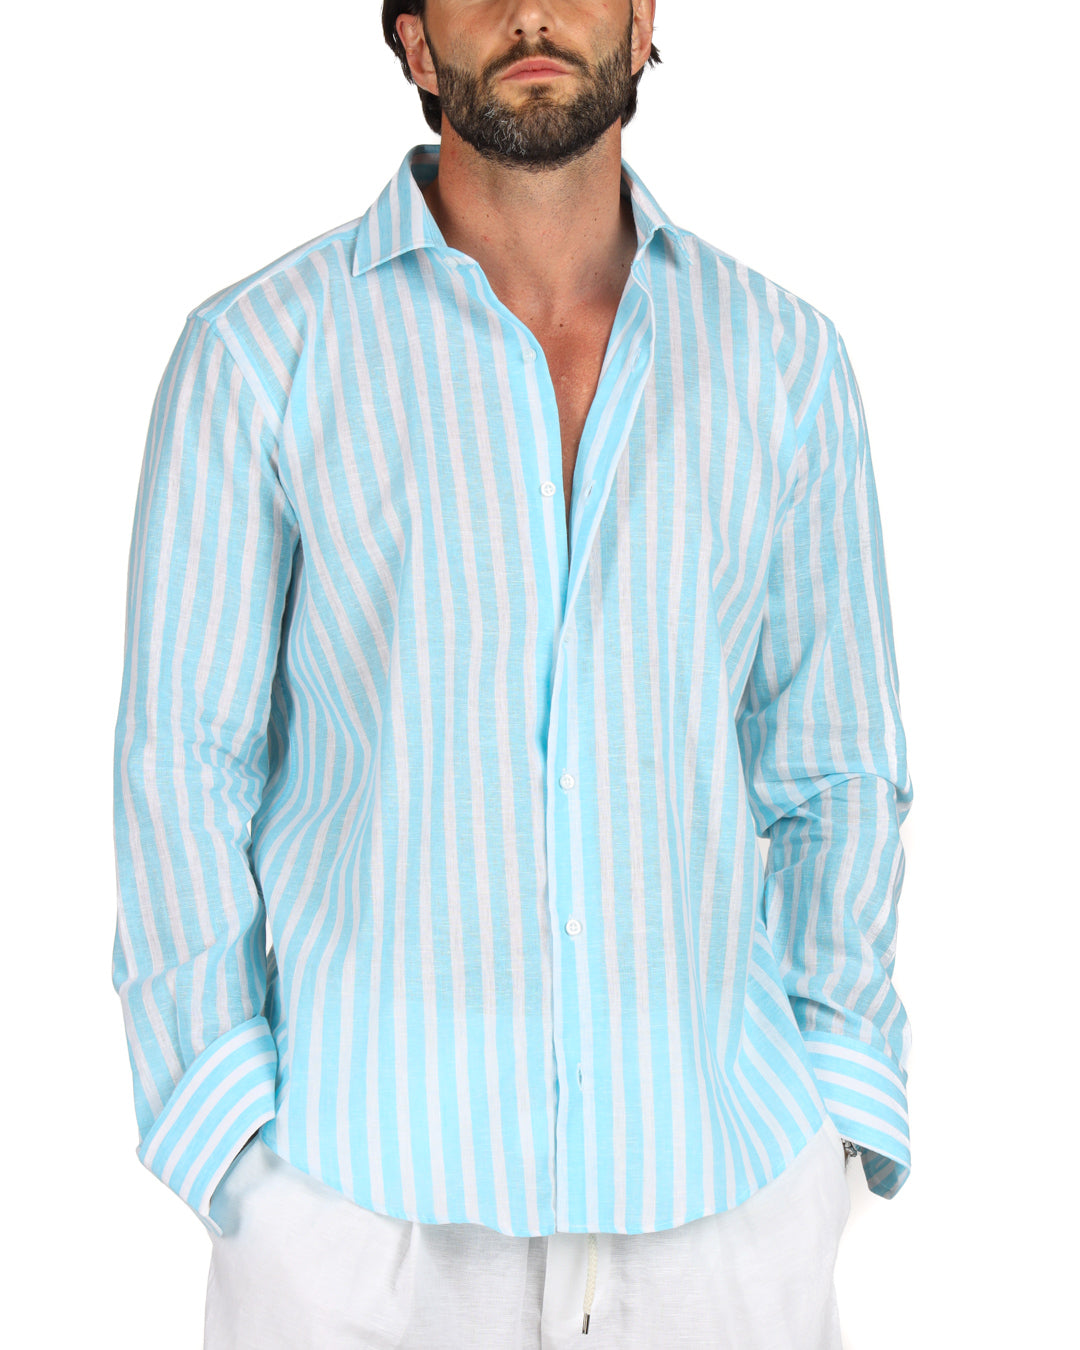 Procida - Classic turquoise wide striped linen shirt